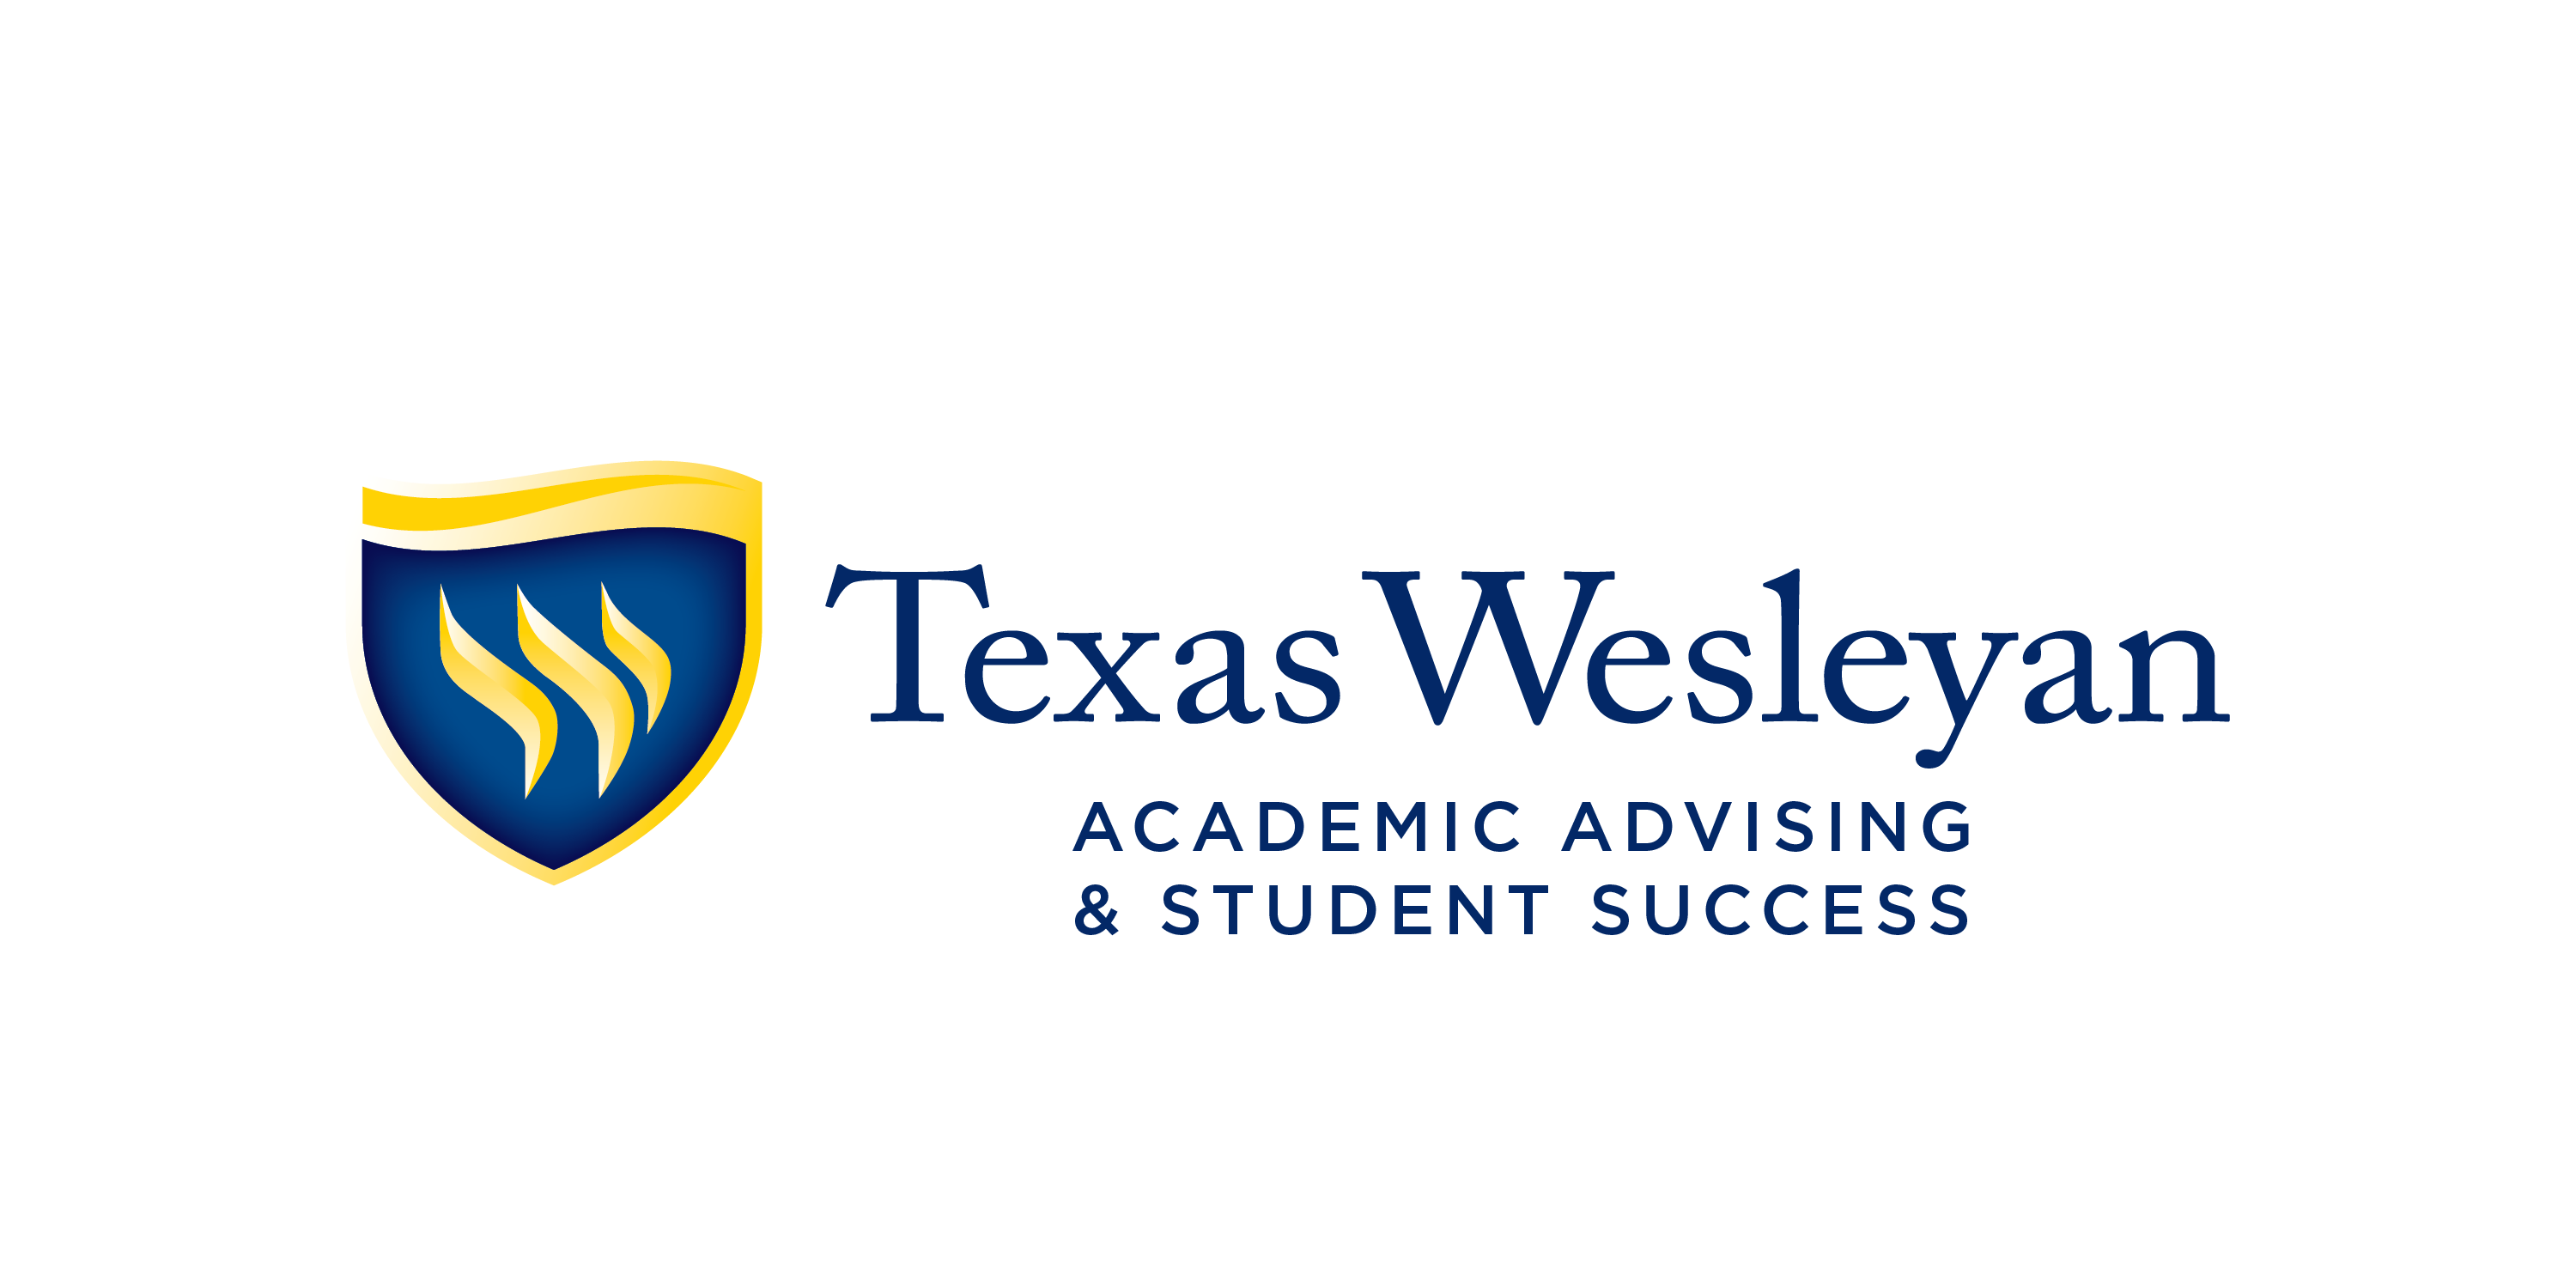 Texas Wesleyan shield logo with Academic Advising and Student Success department name